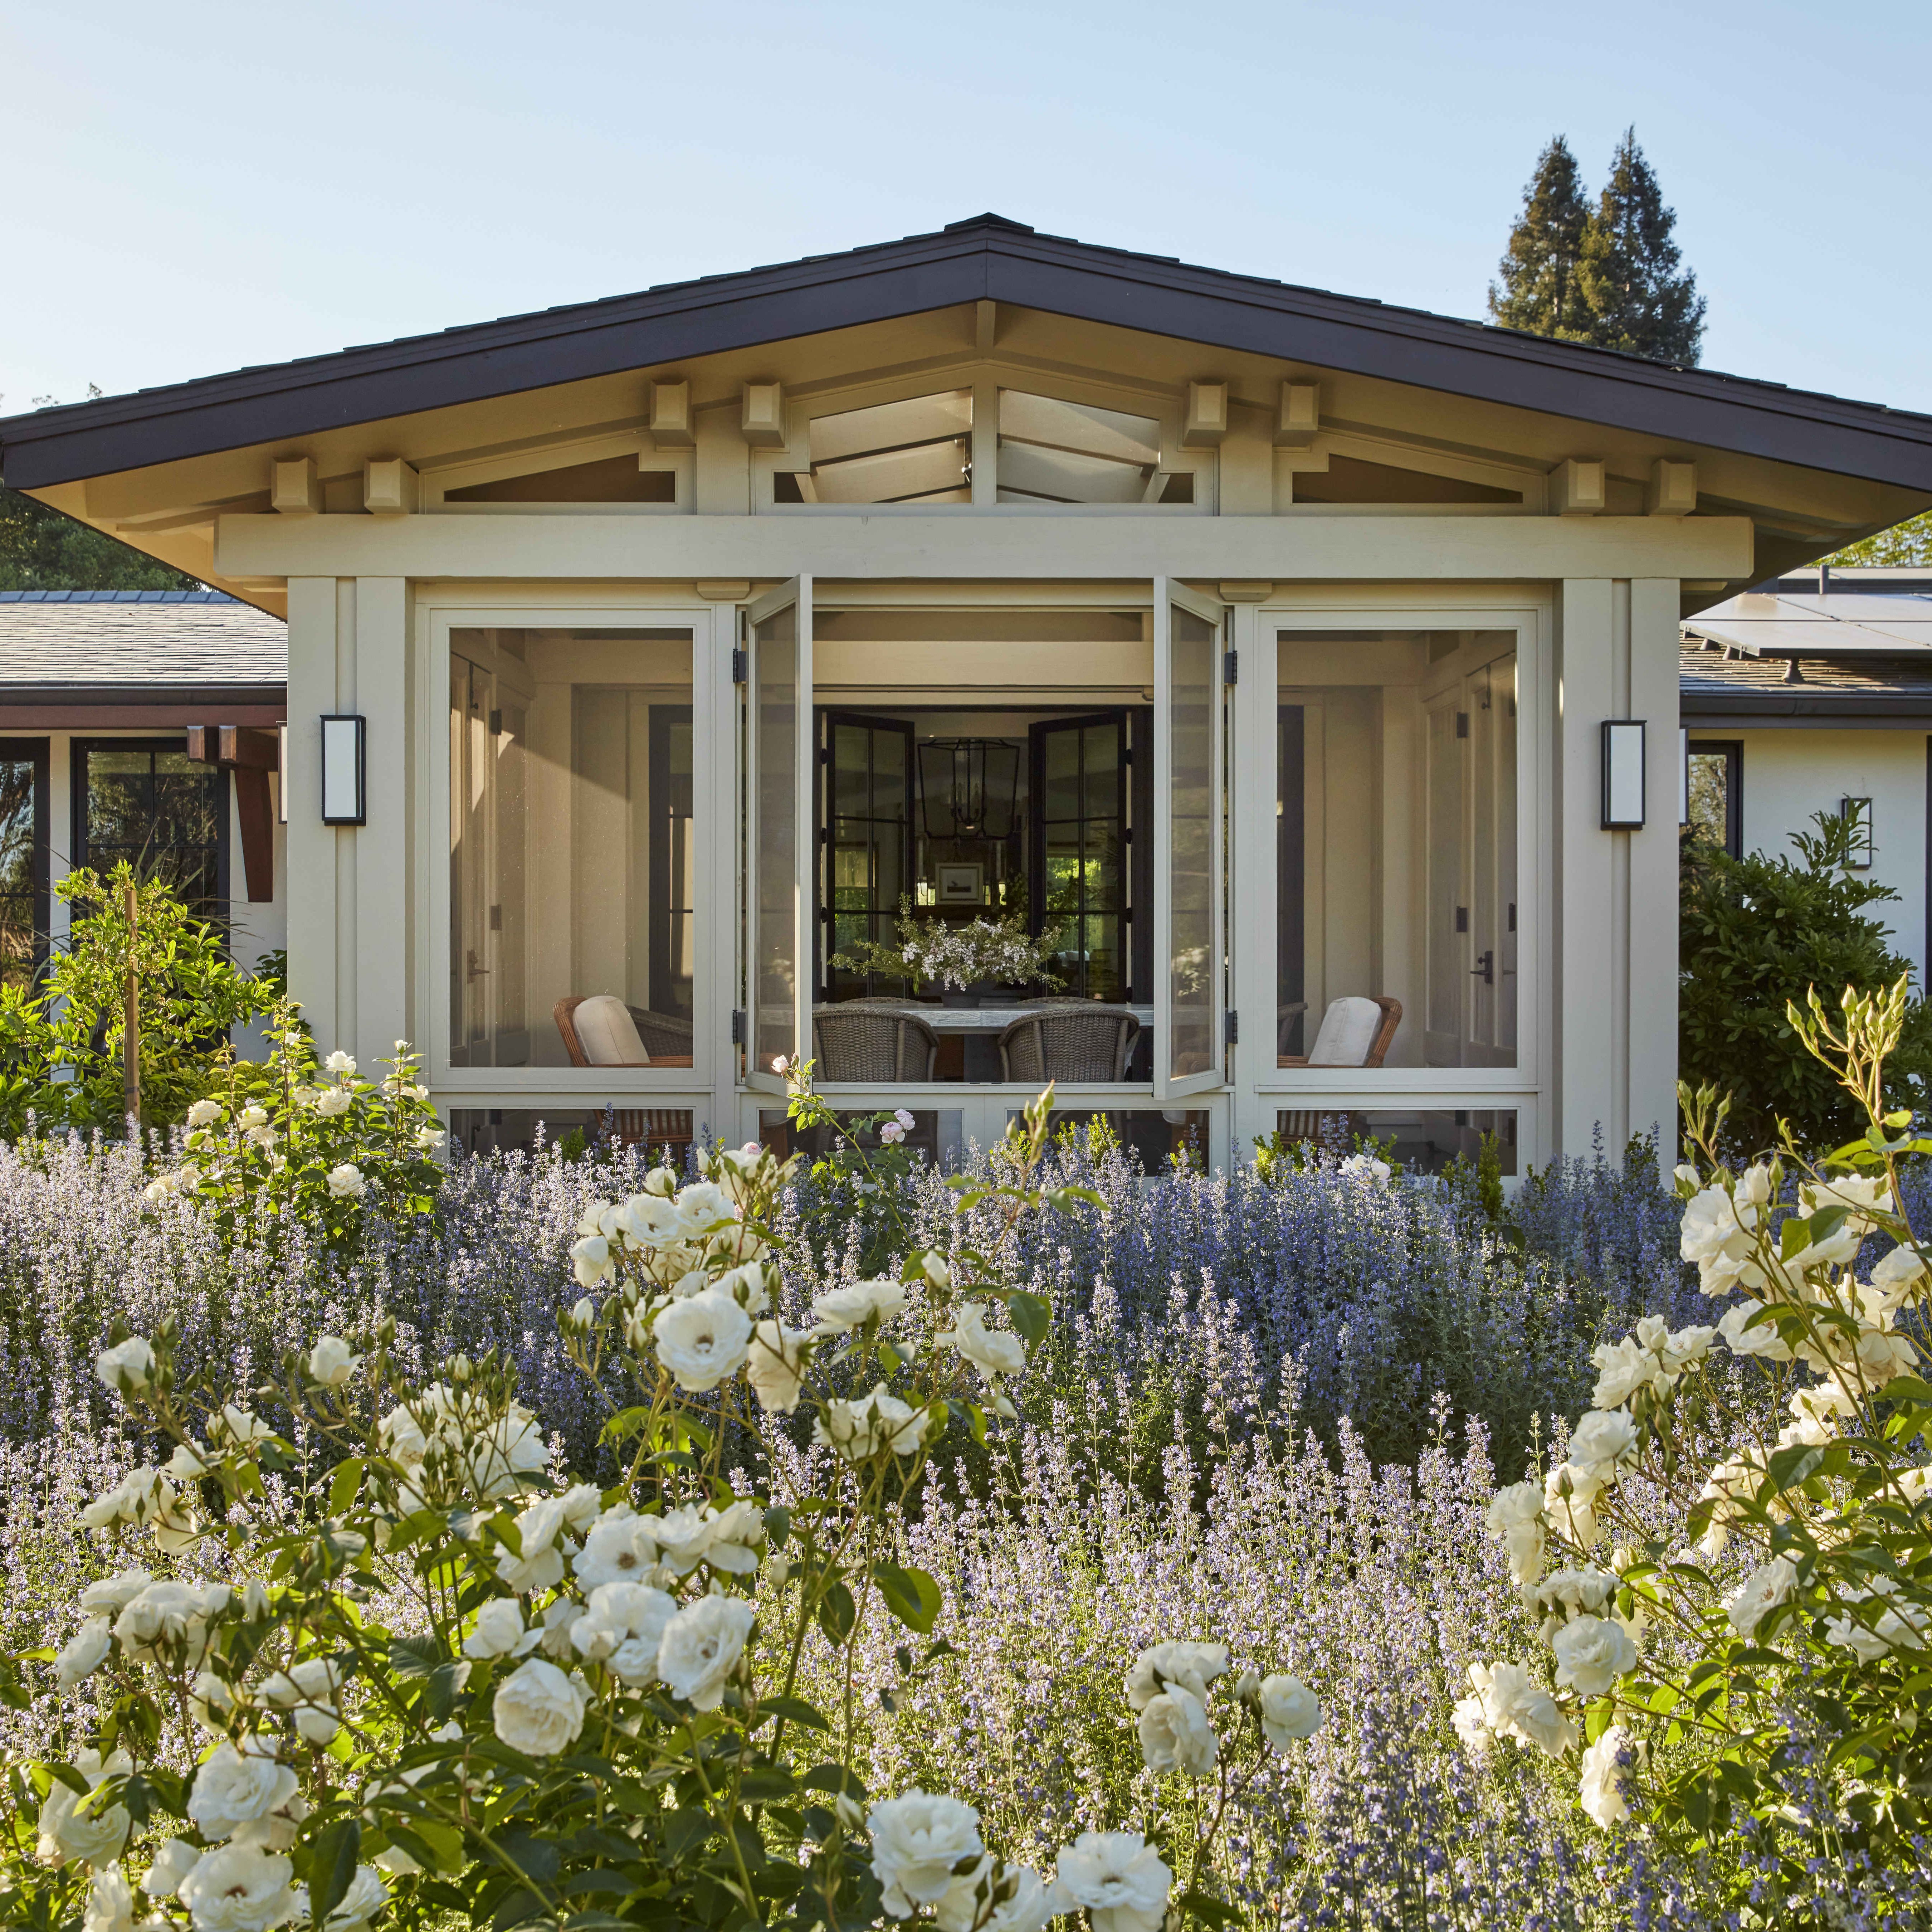 Designer Dan Fink and Architect Carl Baker Turn a Napa Valley Ranch Into the Ultimate Family Getaway